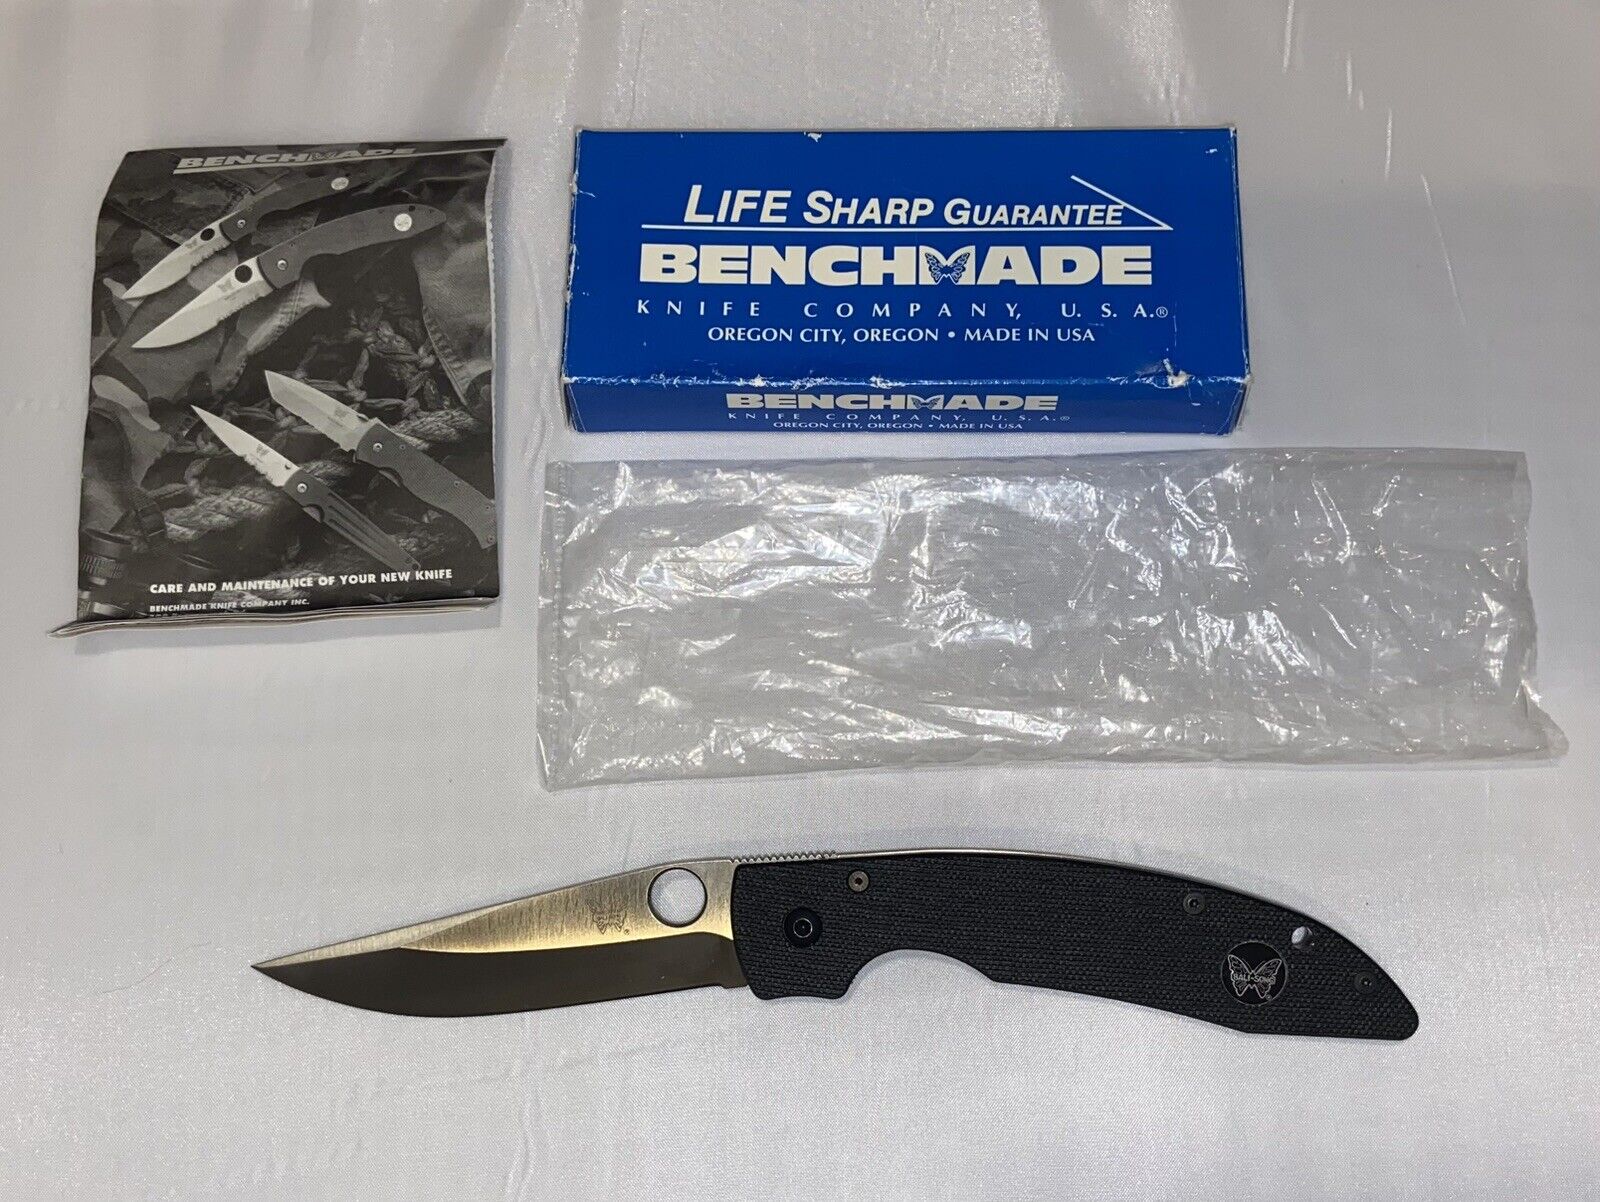 NOS Vintage Benchmade Knife AFCK 800, 90’s or 2000’s, Spent Its Life In A Box